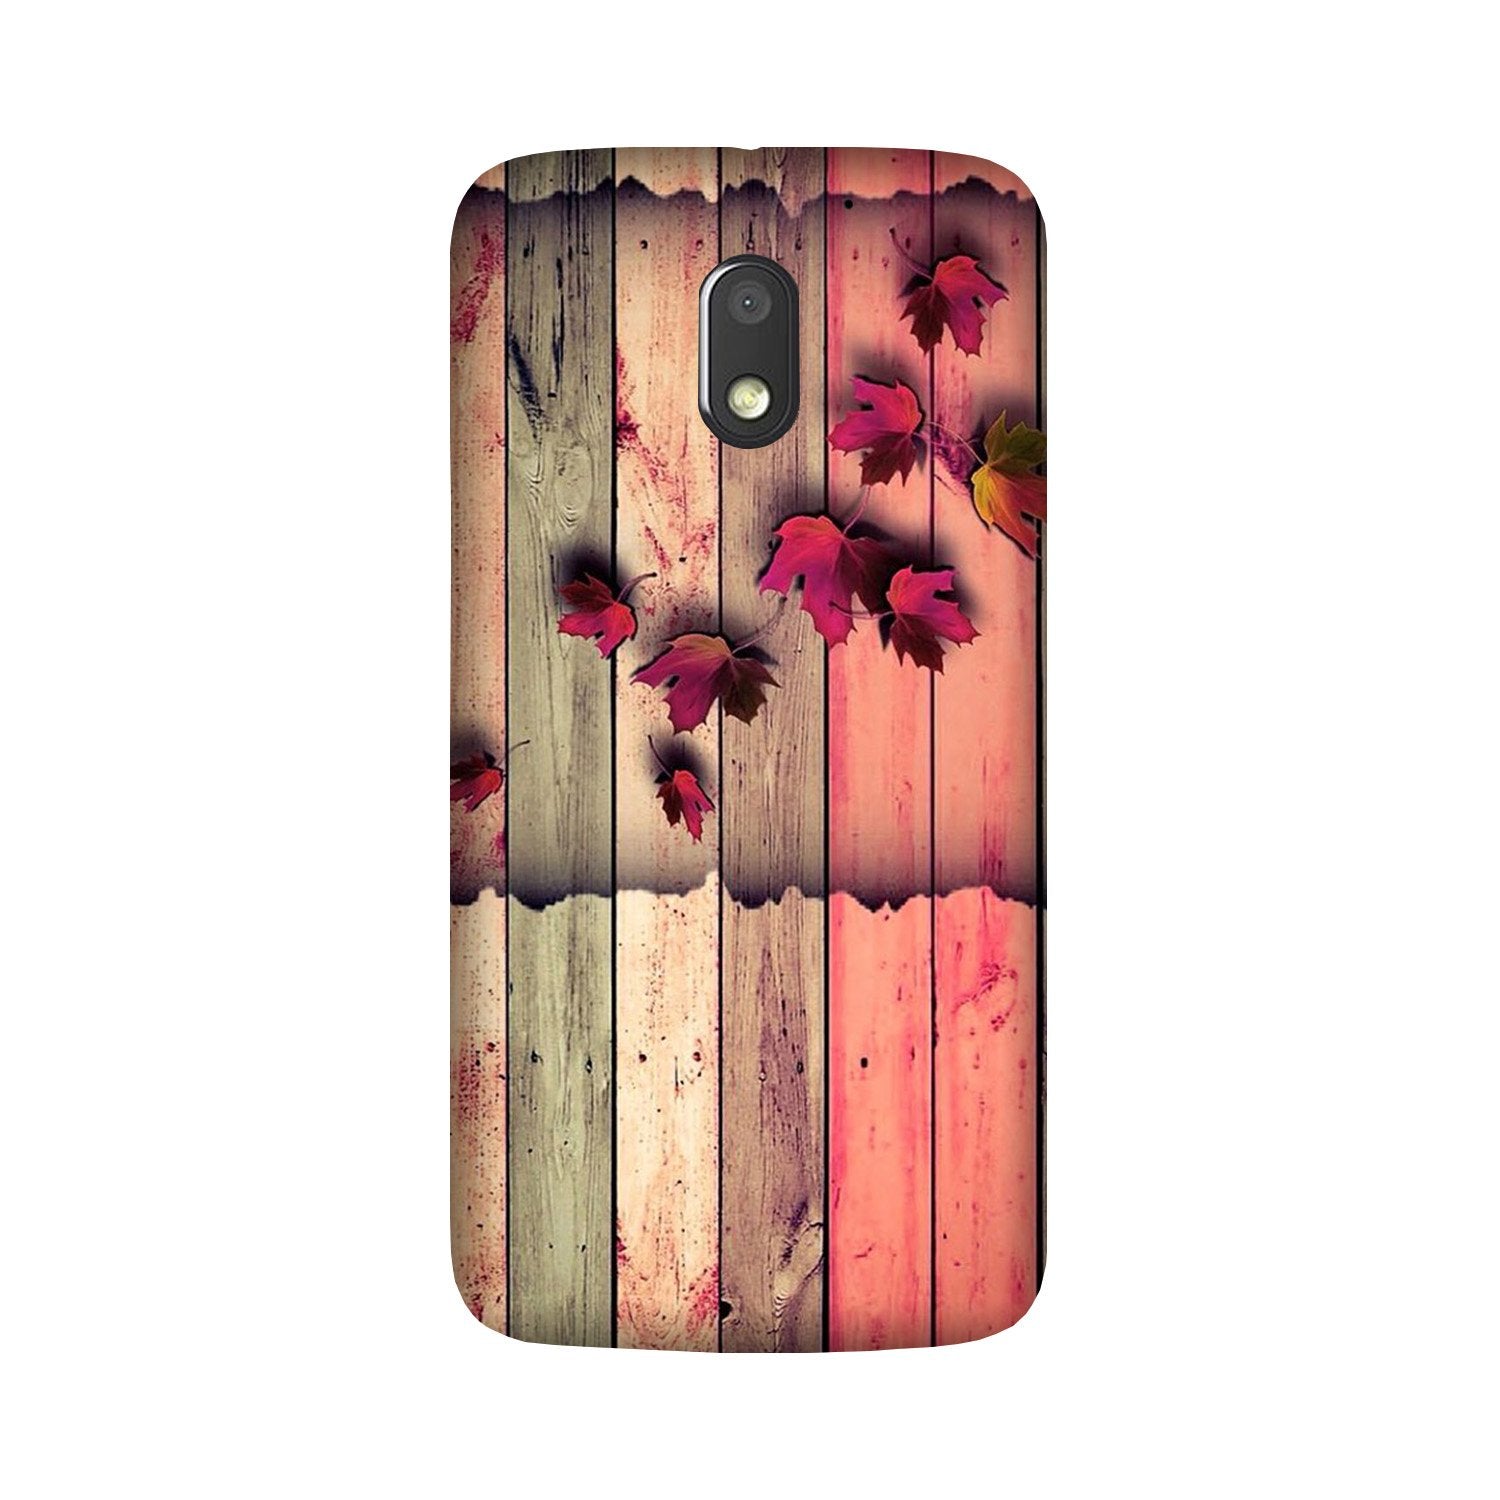 Wooden look2 Case for Moto G4 Play